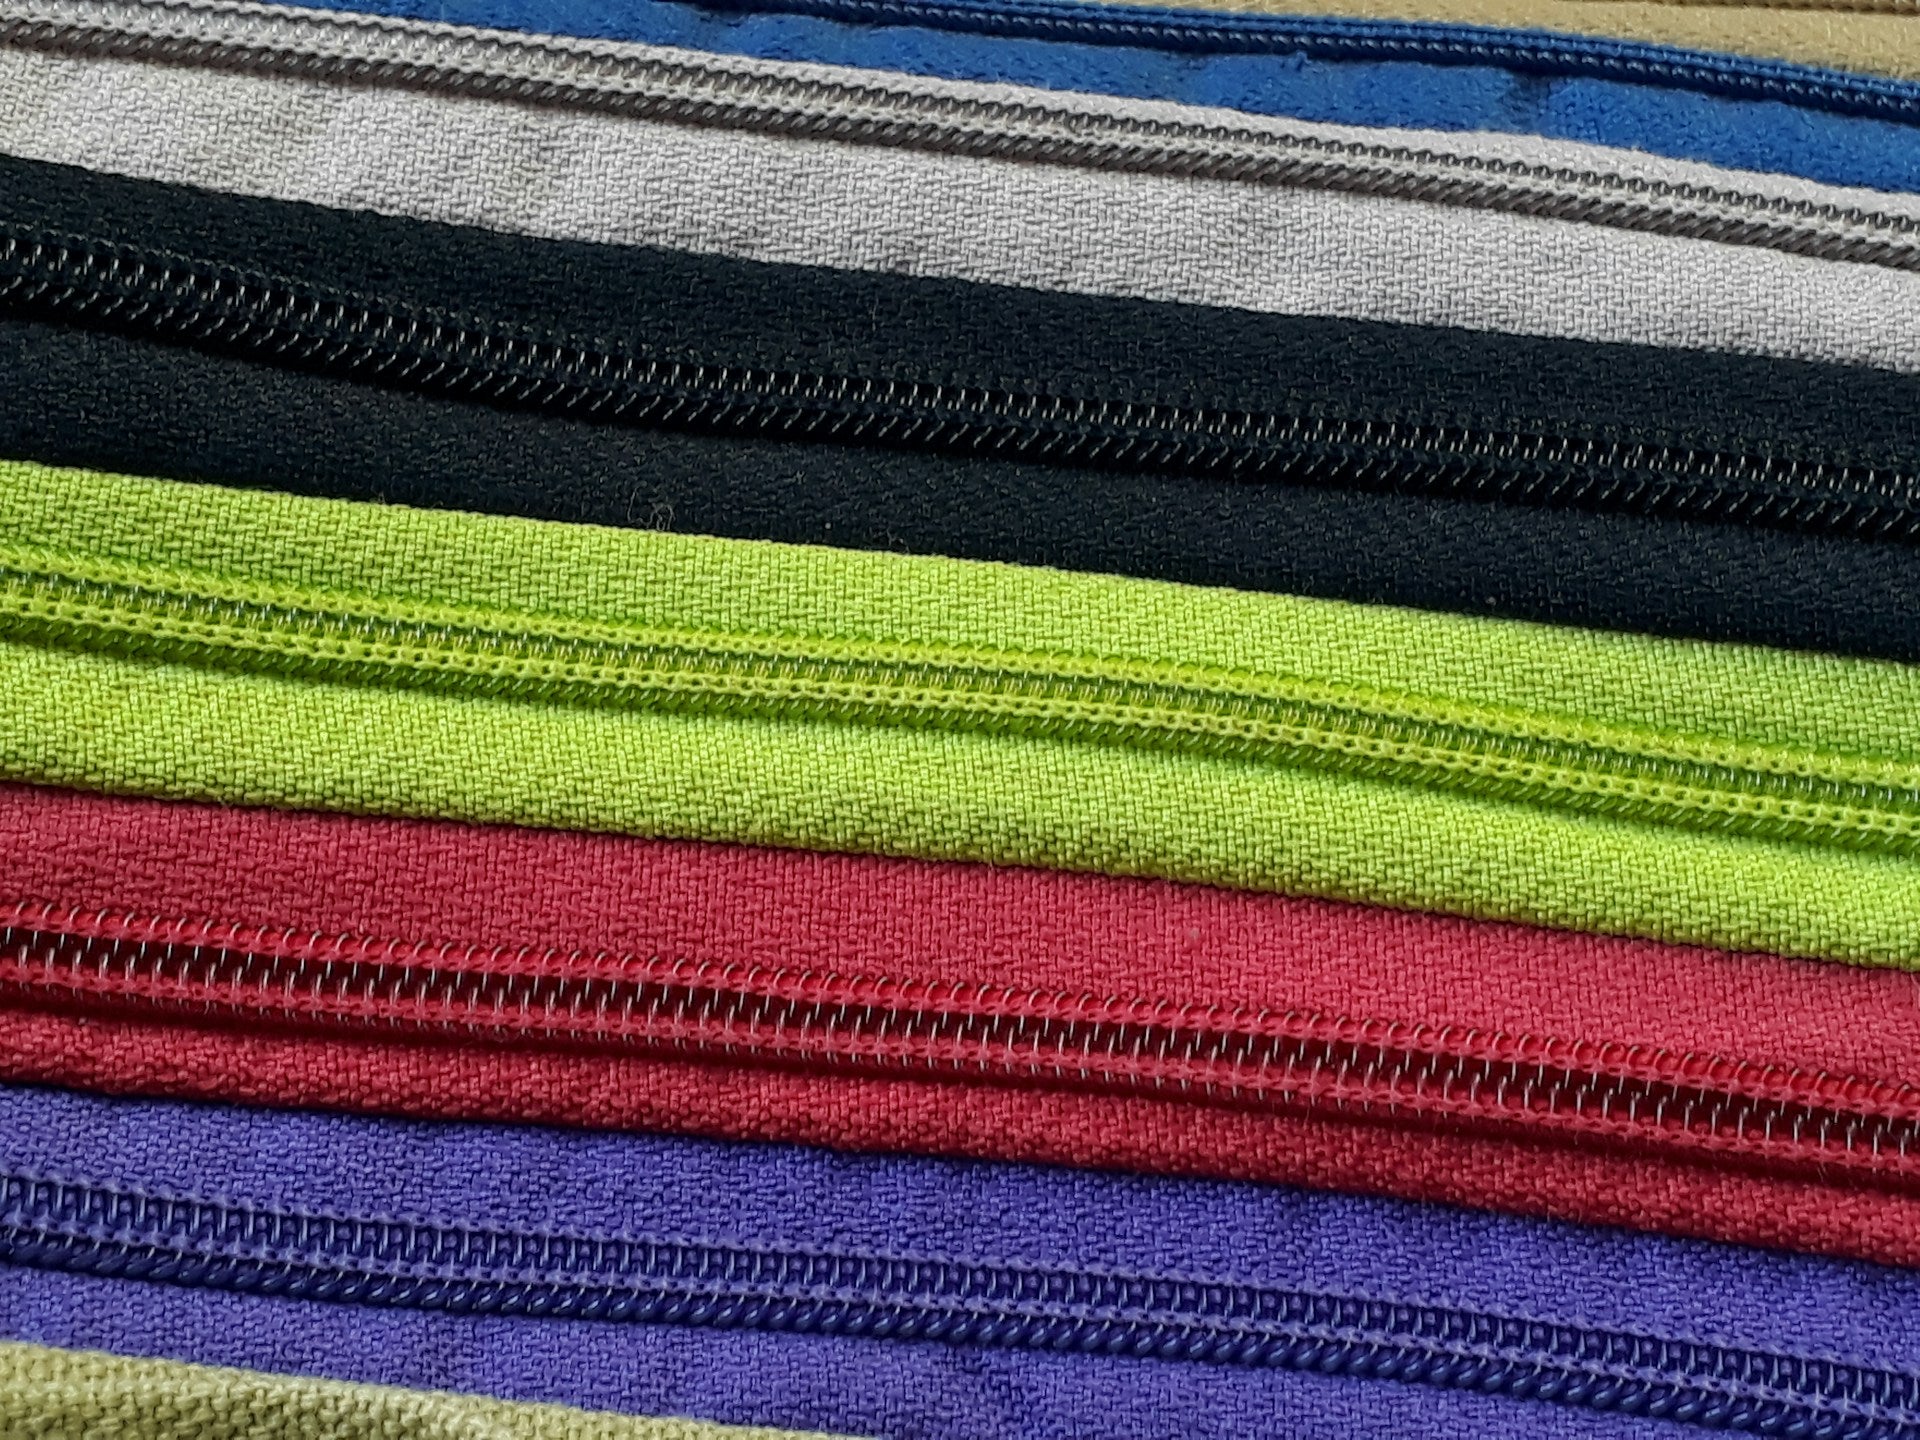 Several zippers in various colors.